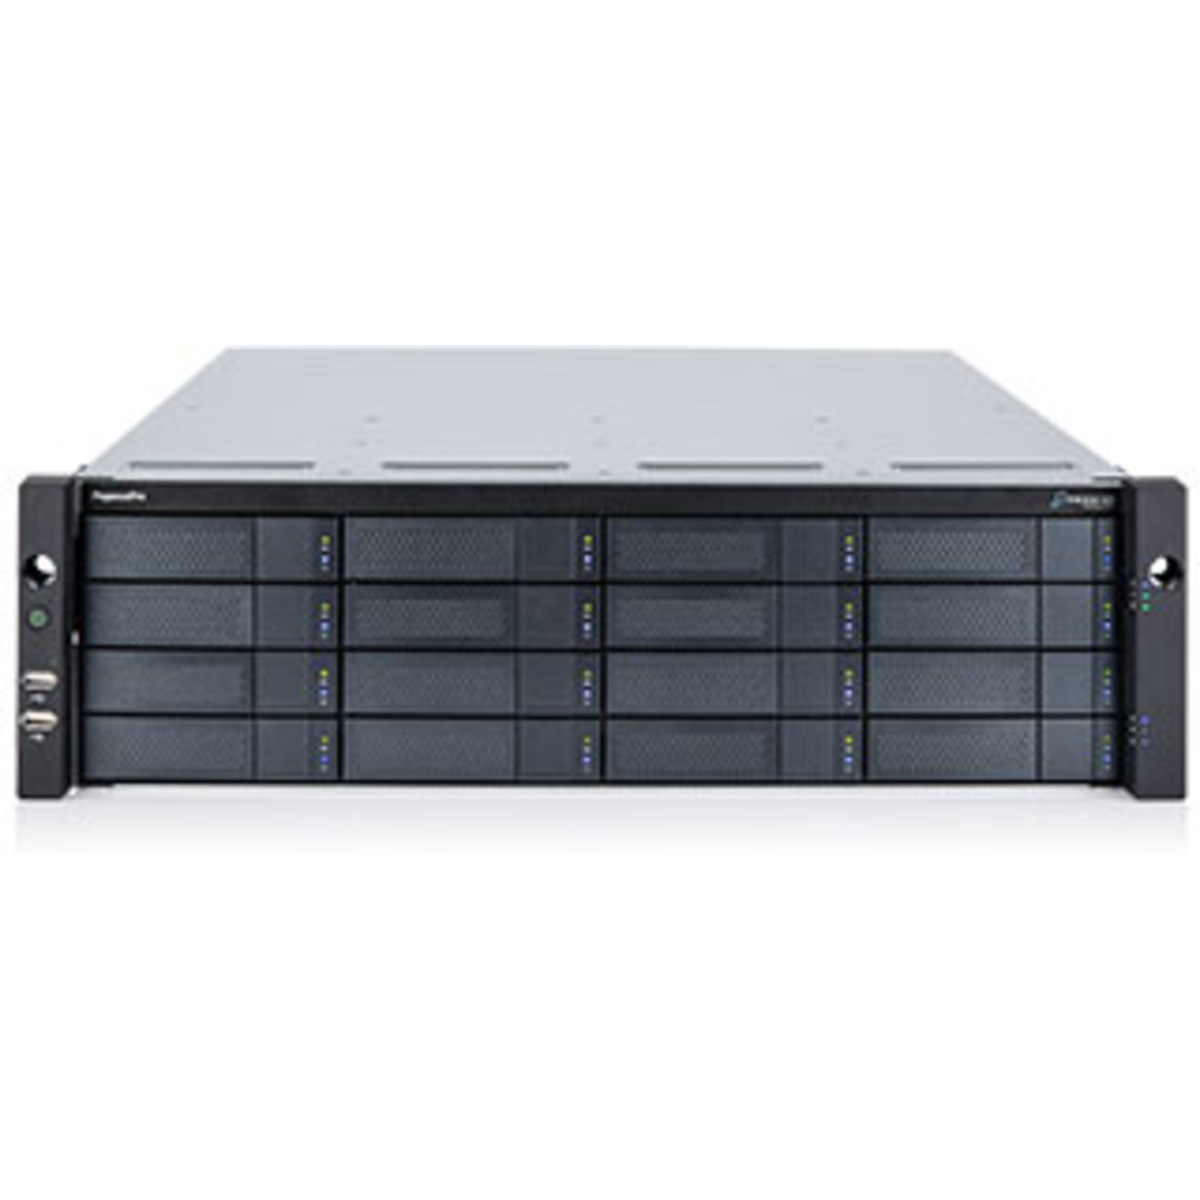 Promise Technology PegasusPro R16 56tb 16-Bay RackMount Multimedia / Power User / Business DAS-NAS - Combo Direct + Network Storage Device 14x4tb Western Digital Red Plus WD40EFPX 3.5 5400rpm SATA 6Gb/s HDD NAS Class Drives Installed - Burn-In Tested PegasusPro R16